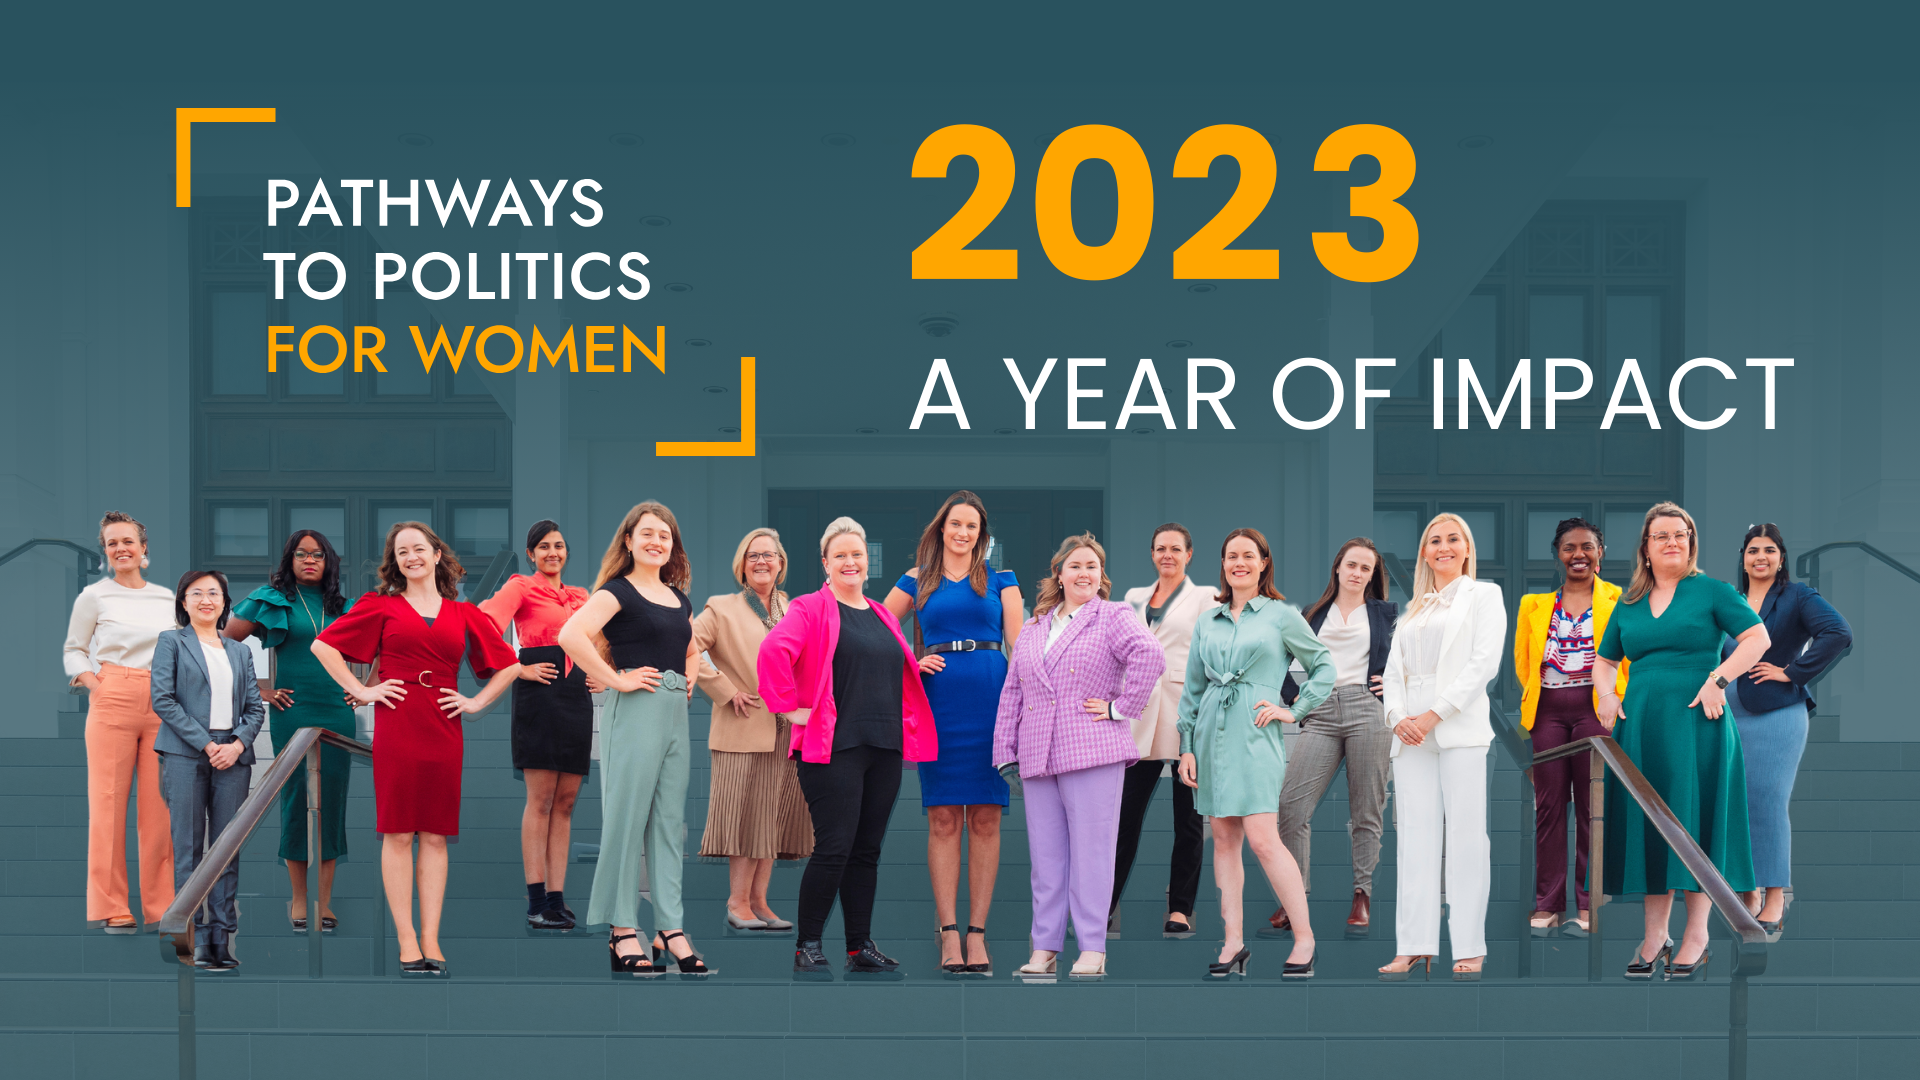 Photo of a large group of diverse, colourfully dressed women with a dark blue washed-out background. Above them text reads "Pathways to Politics for Women 2023 A Year of Impact"